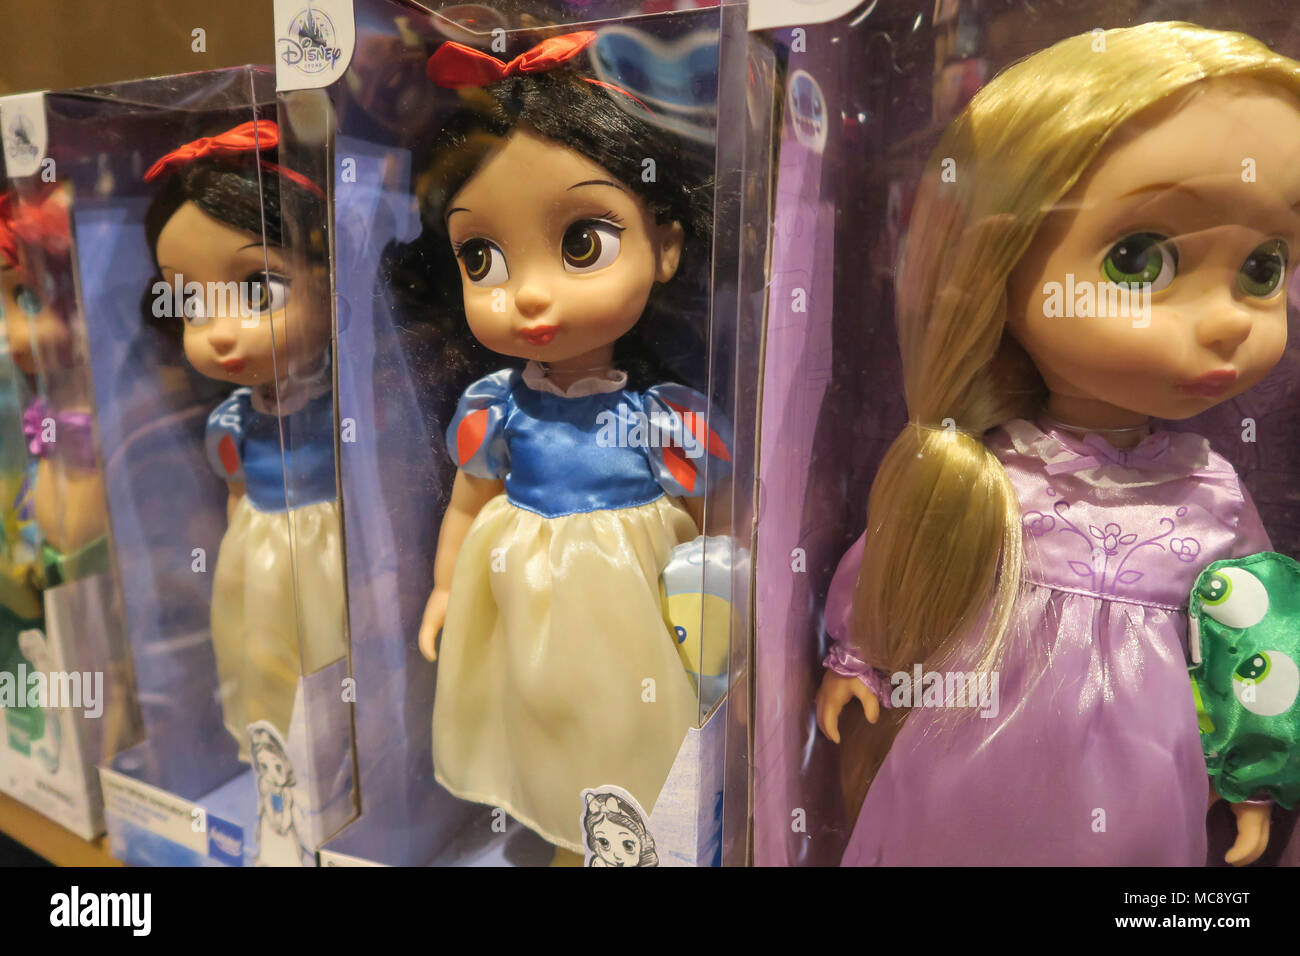 Disney Animators' Collection Dolls in the Disney Store in Times Square, NYC, USA Stock Photo